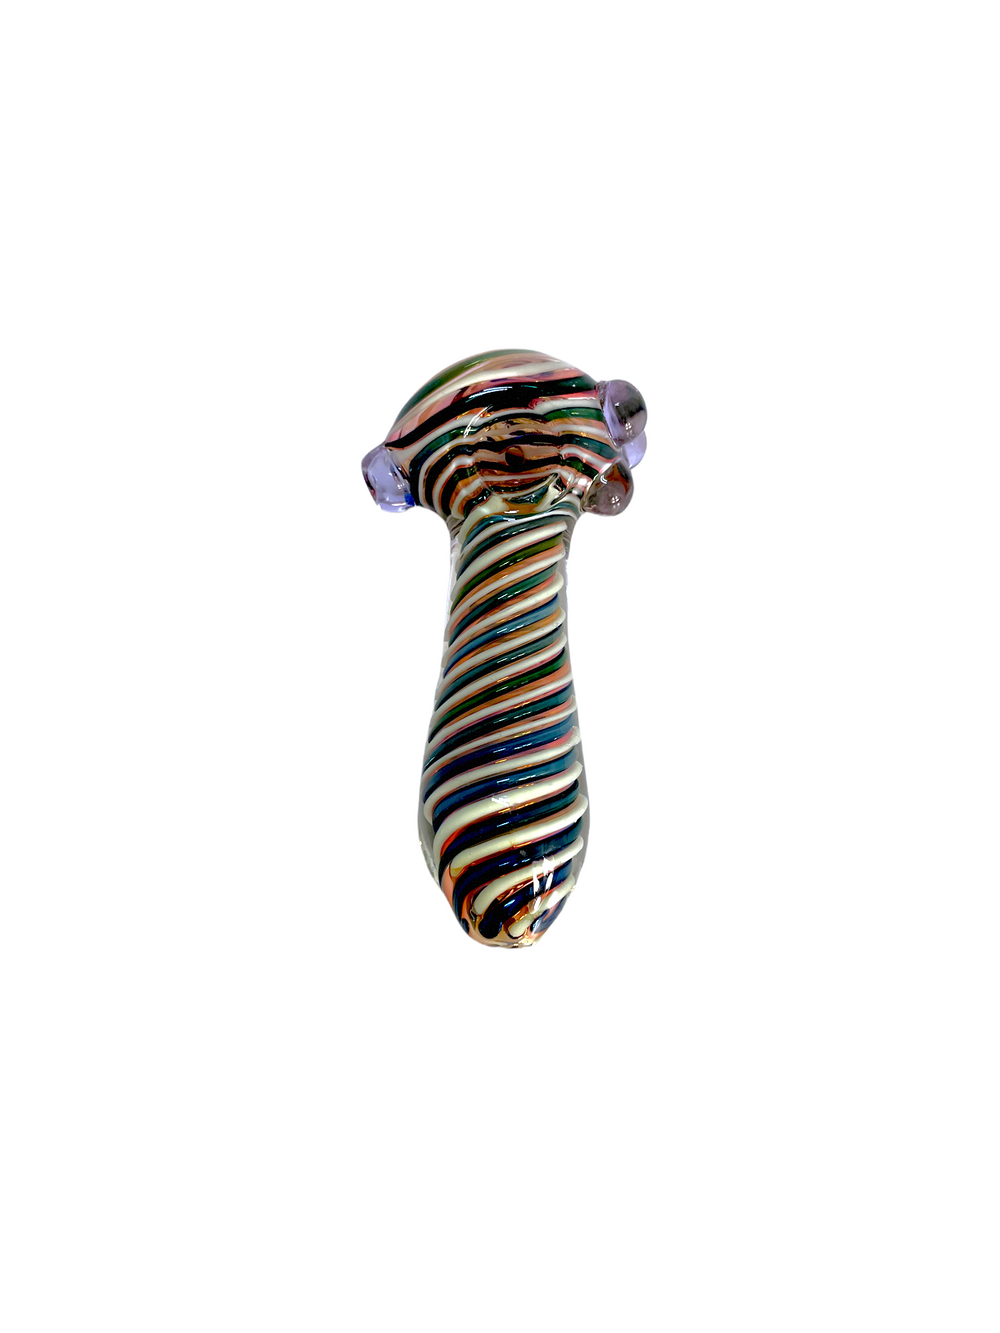 5" Fumed Inside Out Heavy Glass Hand Pipe